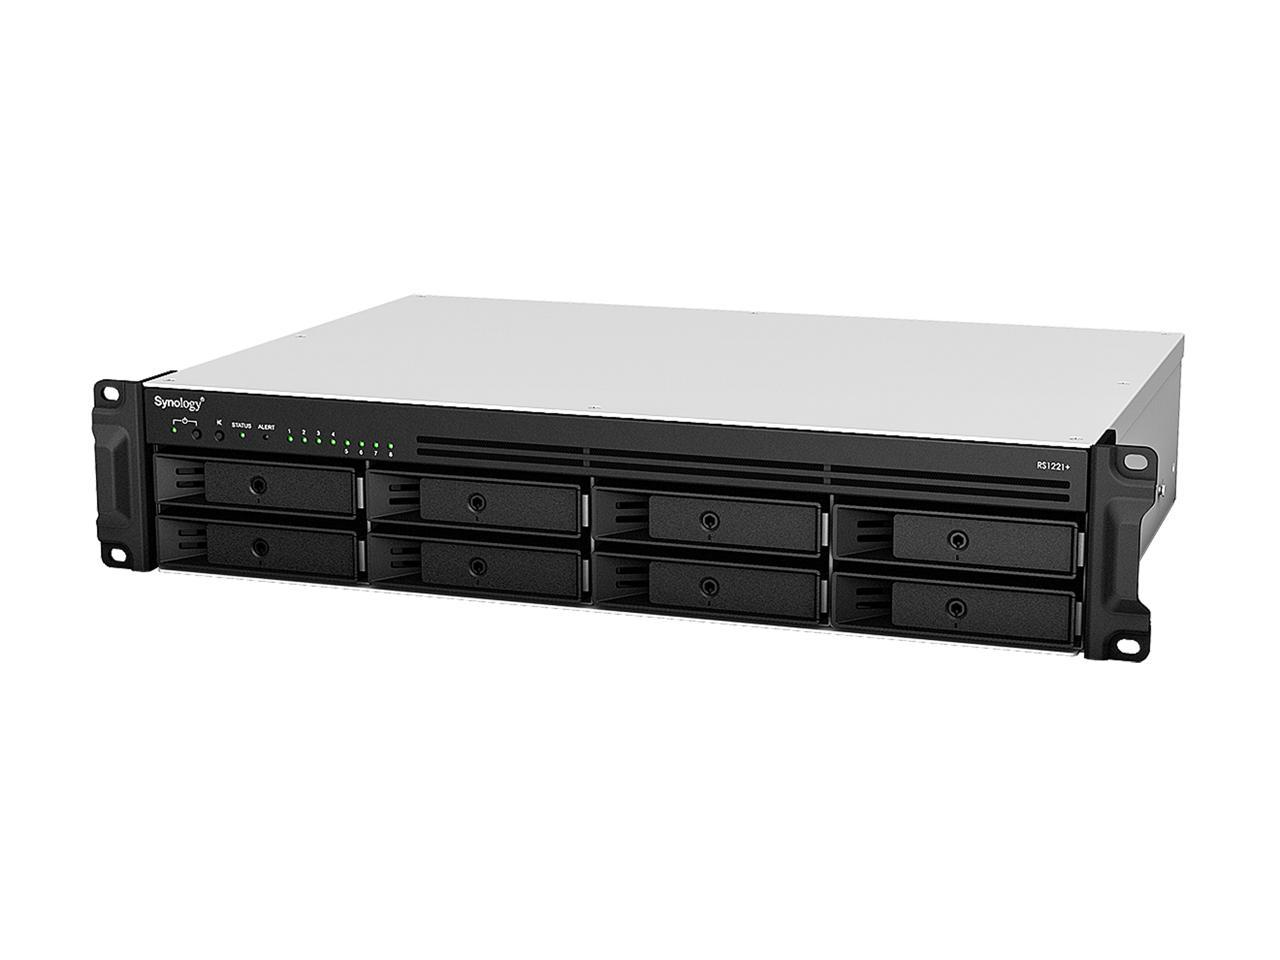 Synology RS1221+ RackStation with 8GB RAM 1.6TB (2x800GB) Cache, 1-Port 10GbE Adapter and 48TB (8 x 6TB) of Synology Plus NAS Drives Fully Assembled and Tested